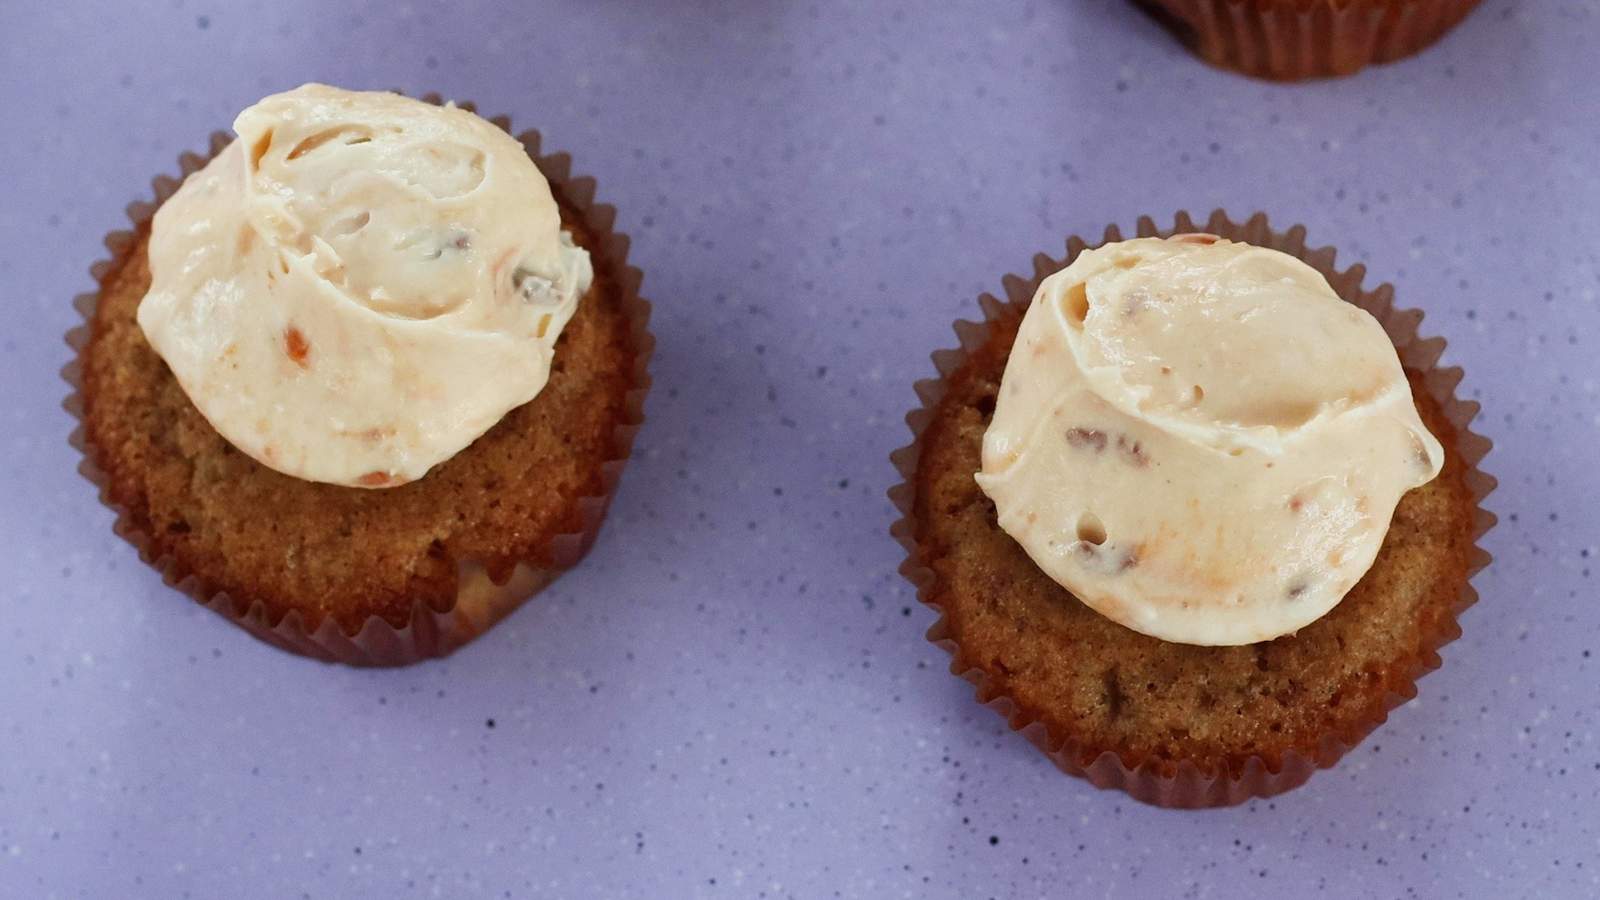 Recipe: Carrot cake with Butterfinger cream cheese frosting